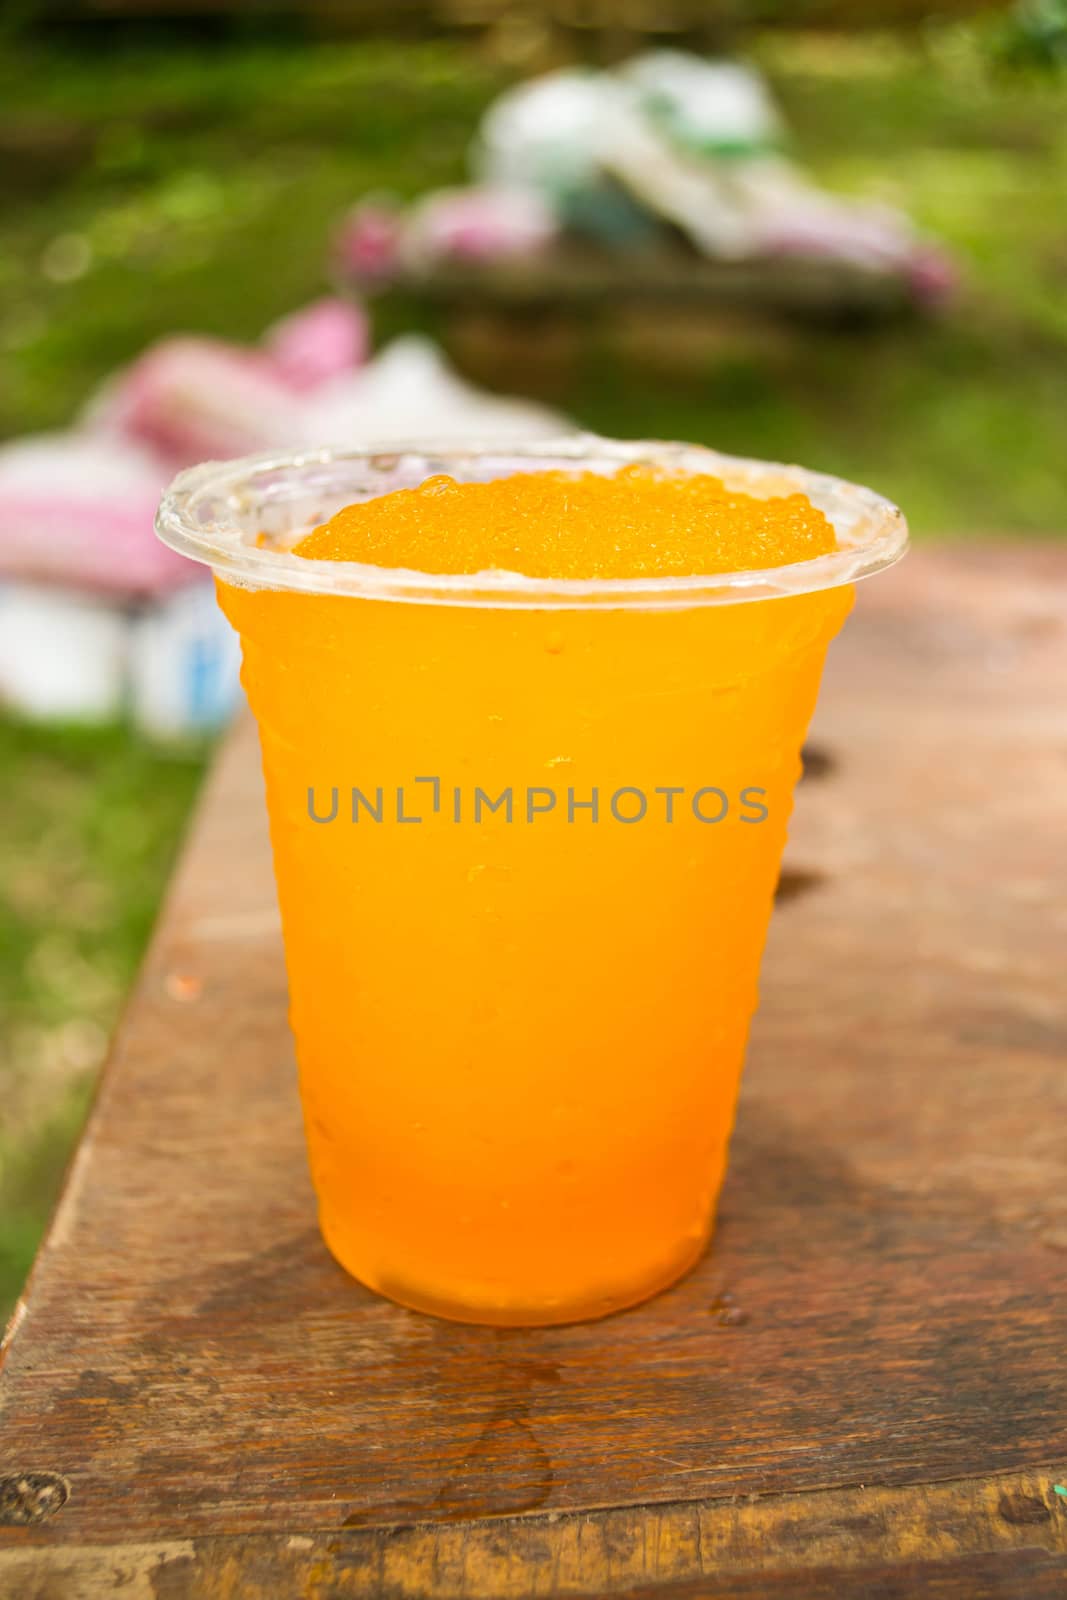 Soft drinks in plastic cups by Thanamat